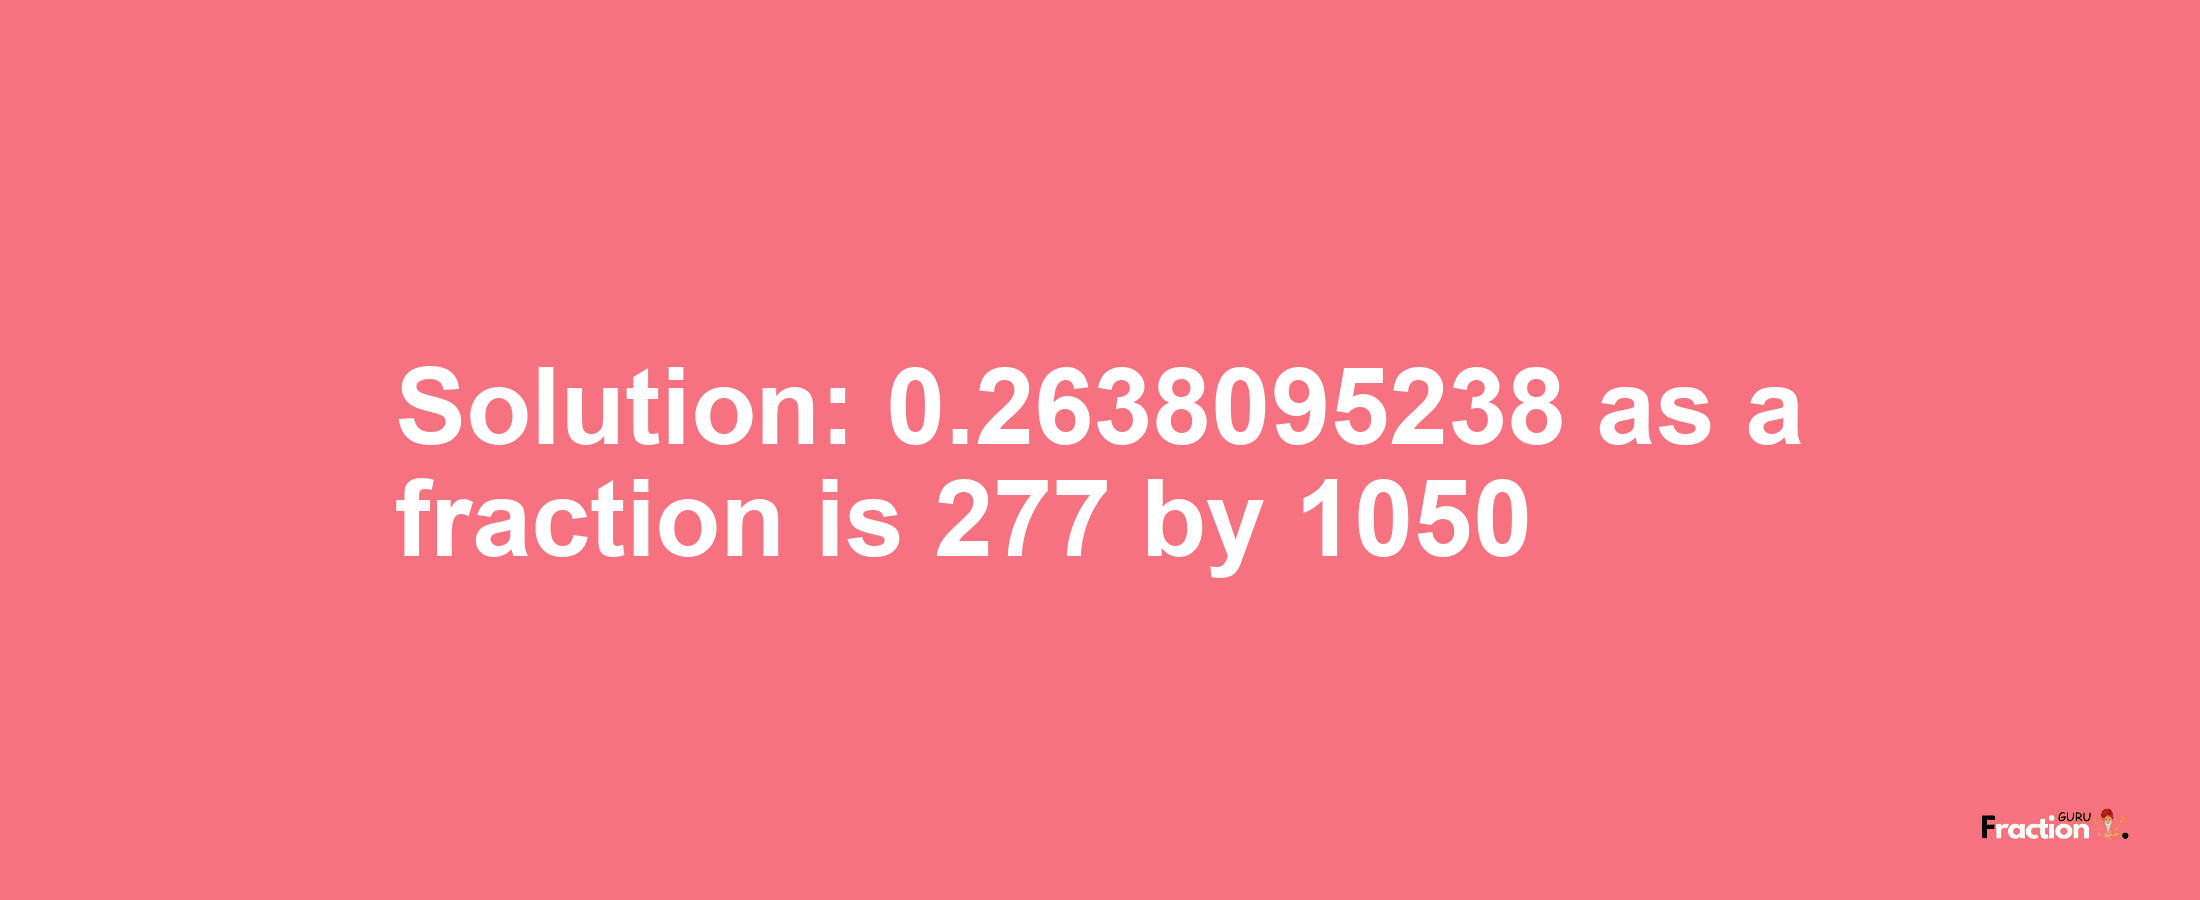 Solution:0.2638095238 as a fraction is 277/1050